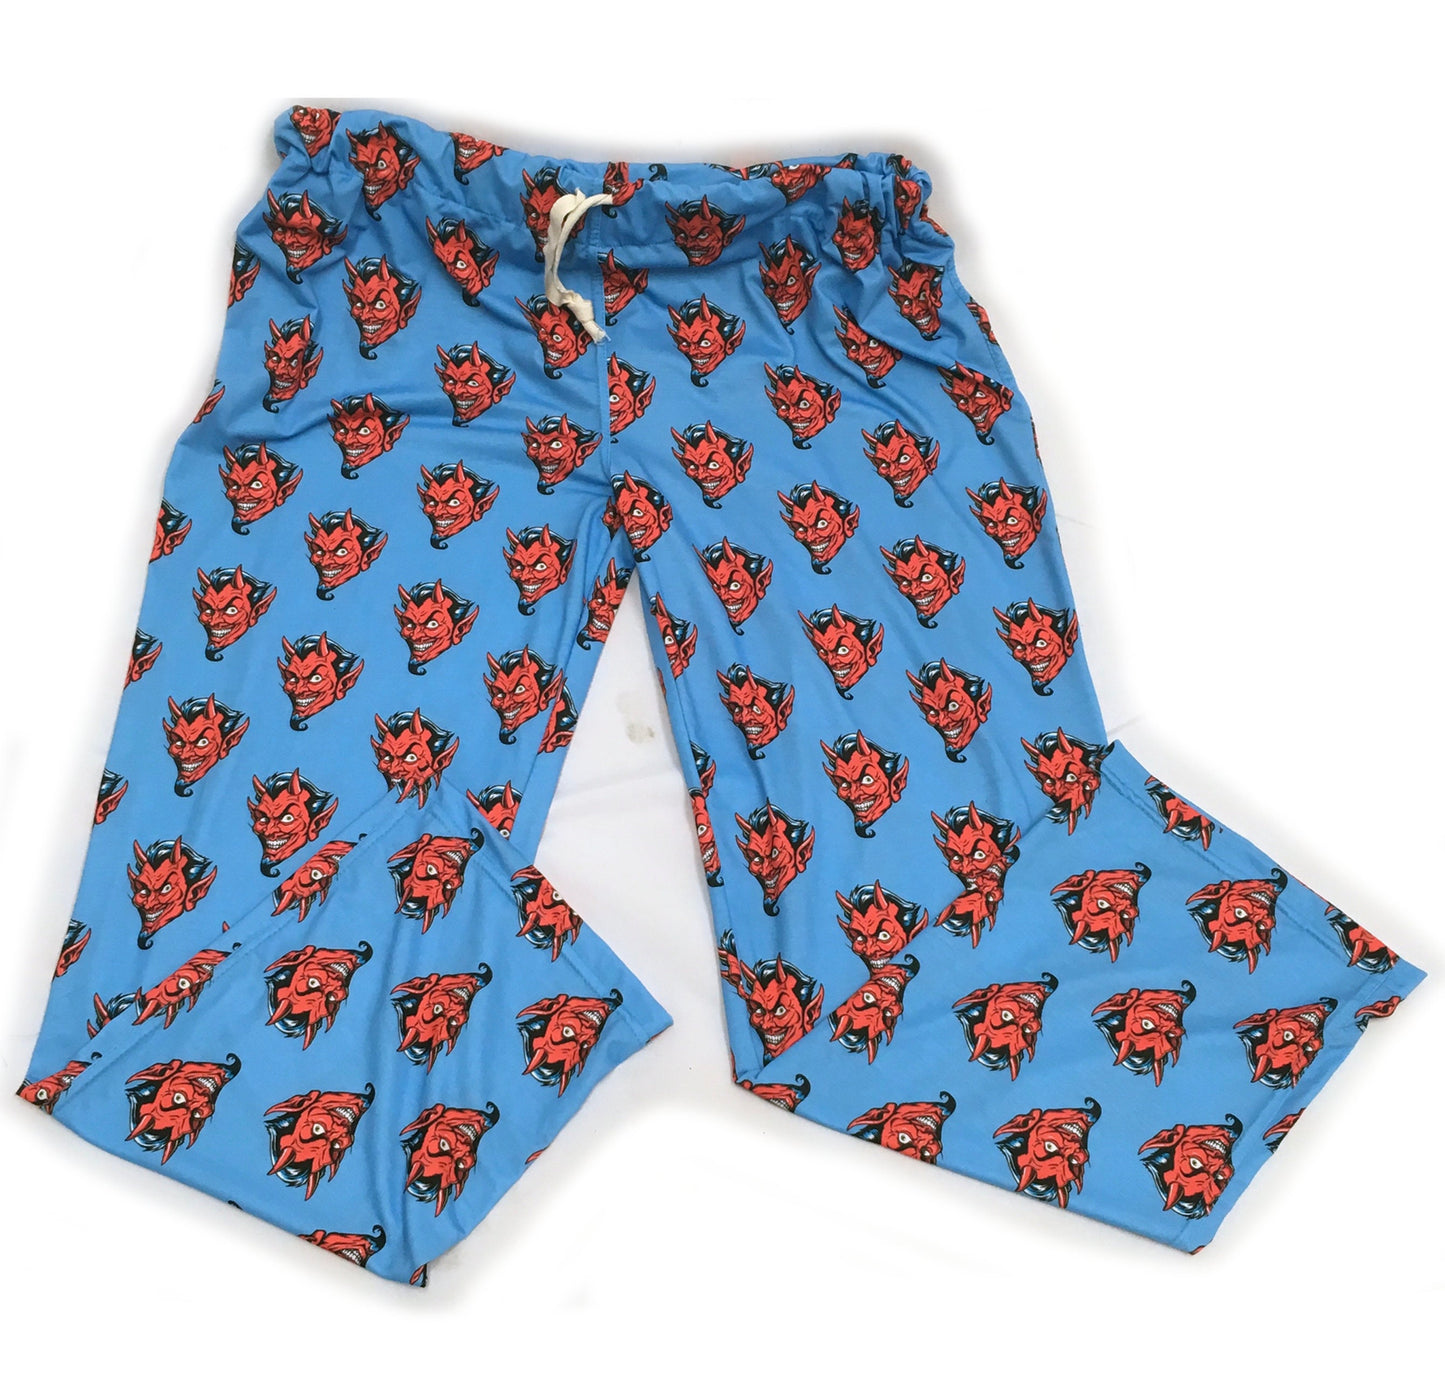 Red Devil on Blue Fabric Pattern, Novelty Design Printed By the Yard for Crafts, Shirts, Masks